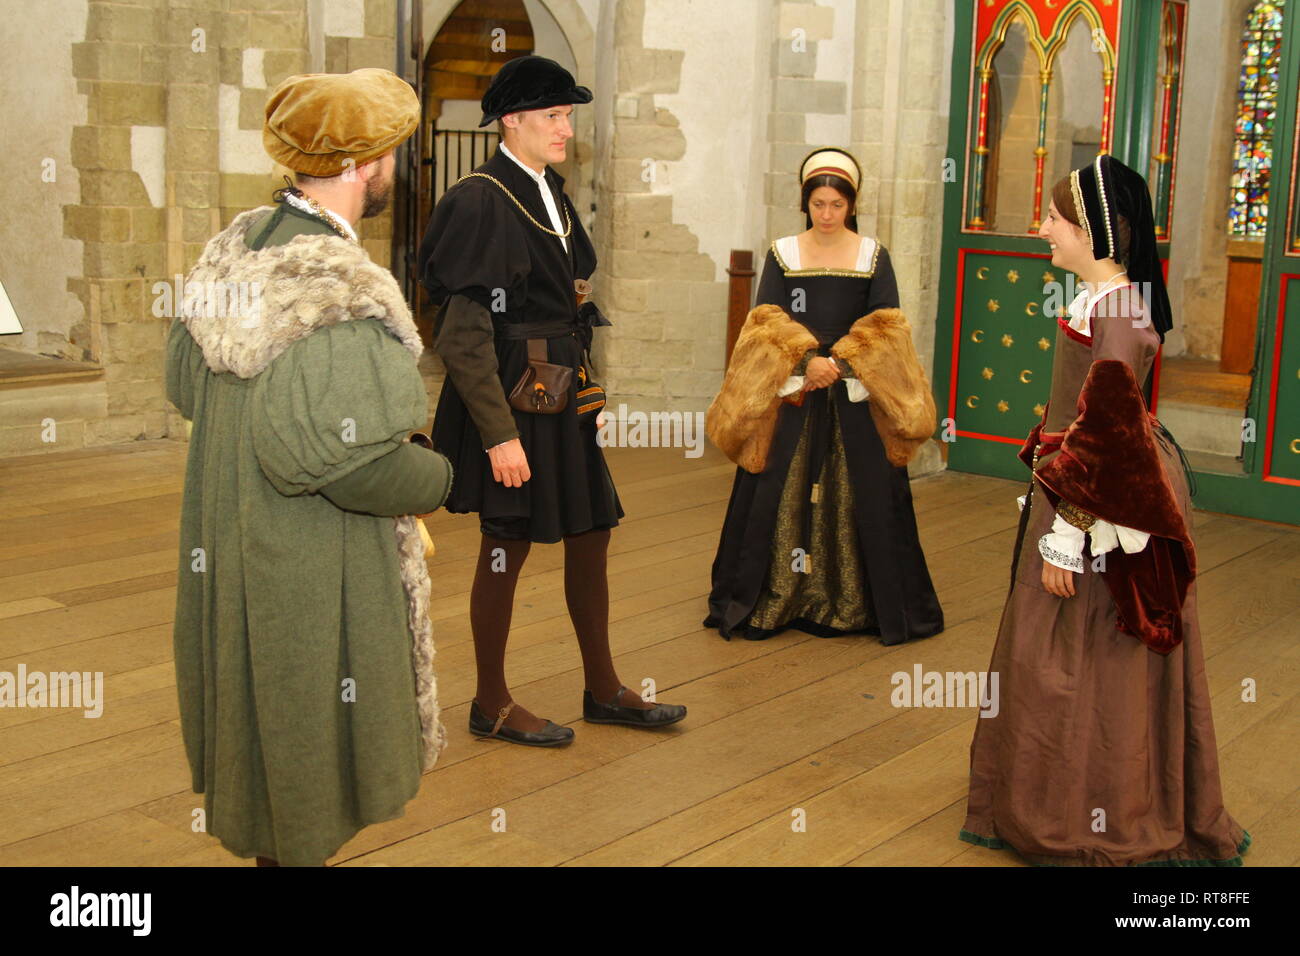 https://c8.alamy.com/comp/RT8FFE/anne-boleyn-and-tudor-friends-dance-together-at-the-tower-of-london-they-are-dressed-in-fine-clothes-RT8FFE.jpg